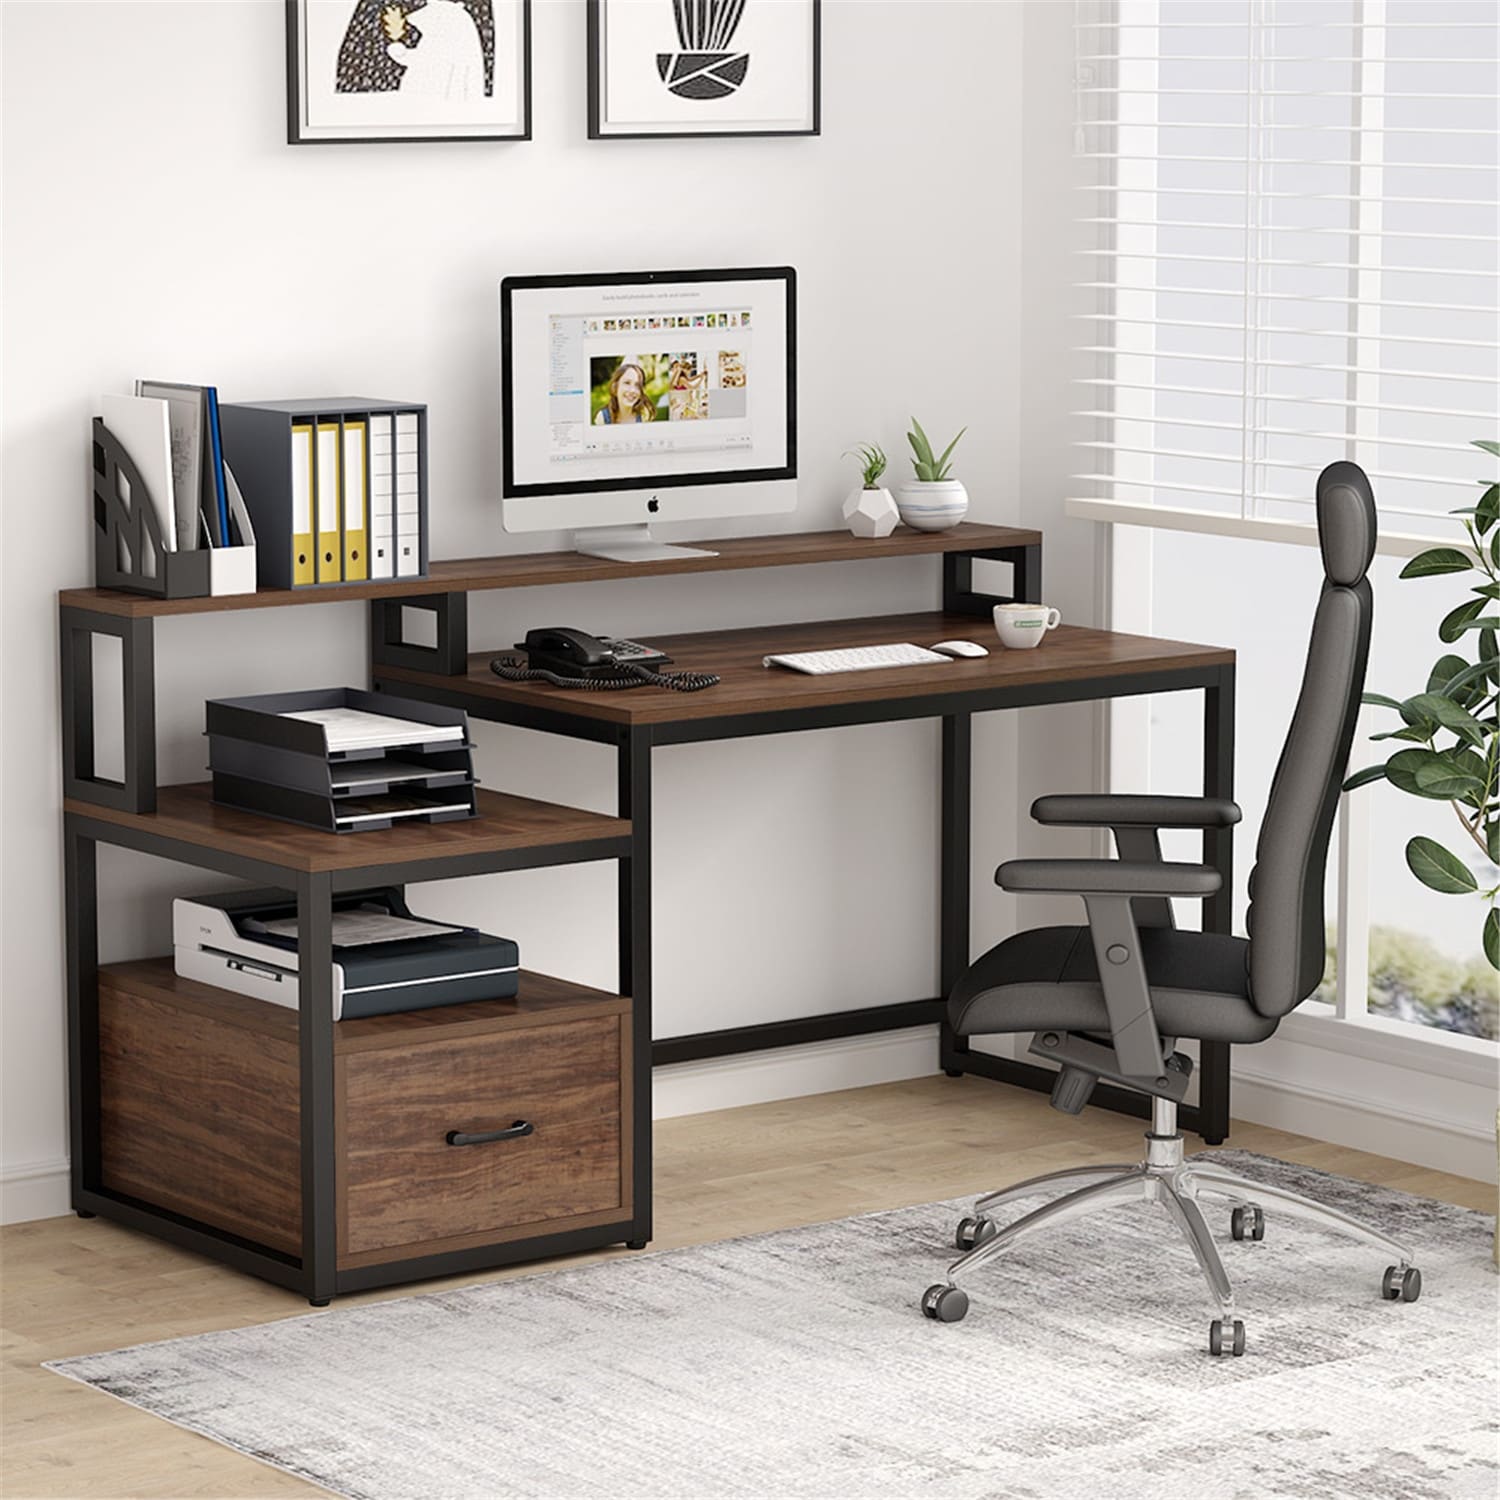 https://ak1.ostkcdn.com/images/products/is/images/direct/a2cc3566ae3c1924b6f8e322dd1b82ef1d734118/Computer-Desk-with-File-Drawer-and-Storage-Shelves.jpg